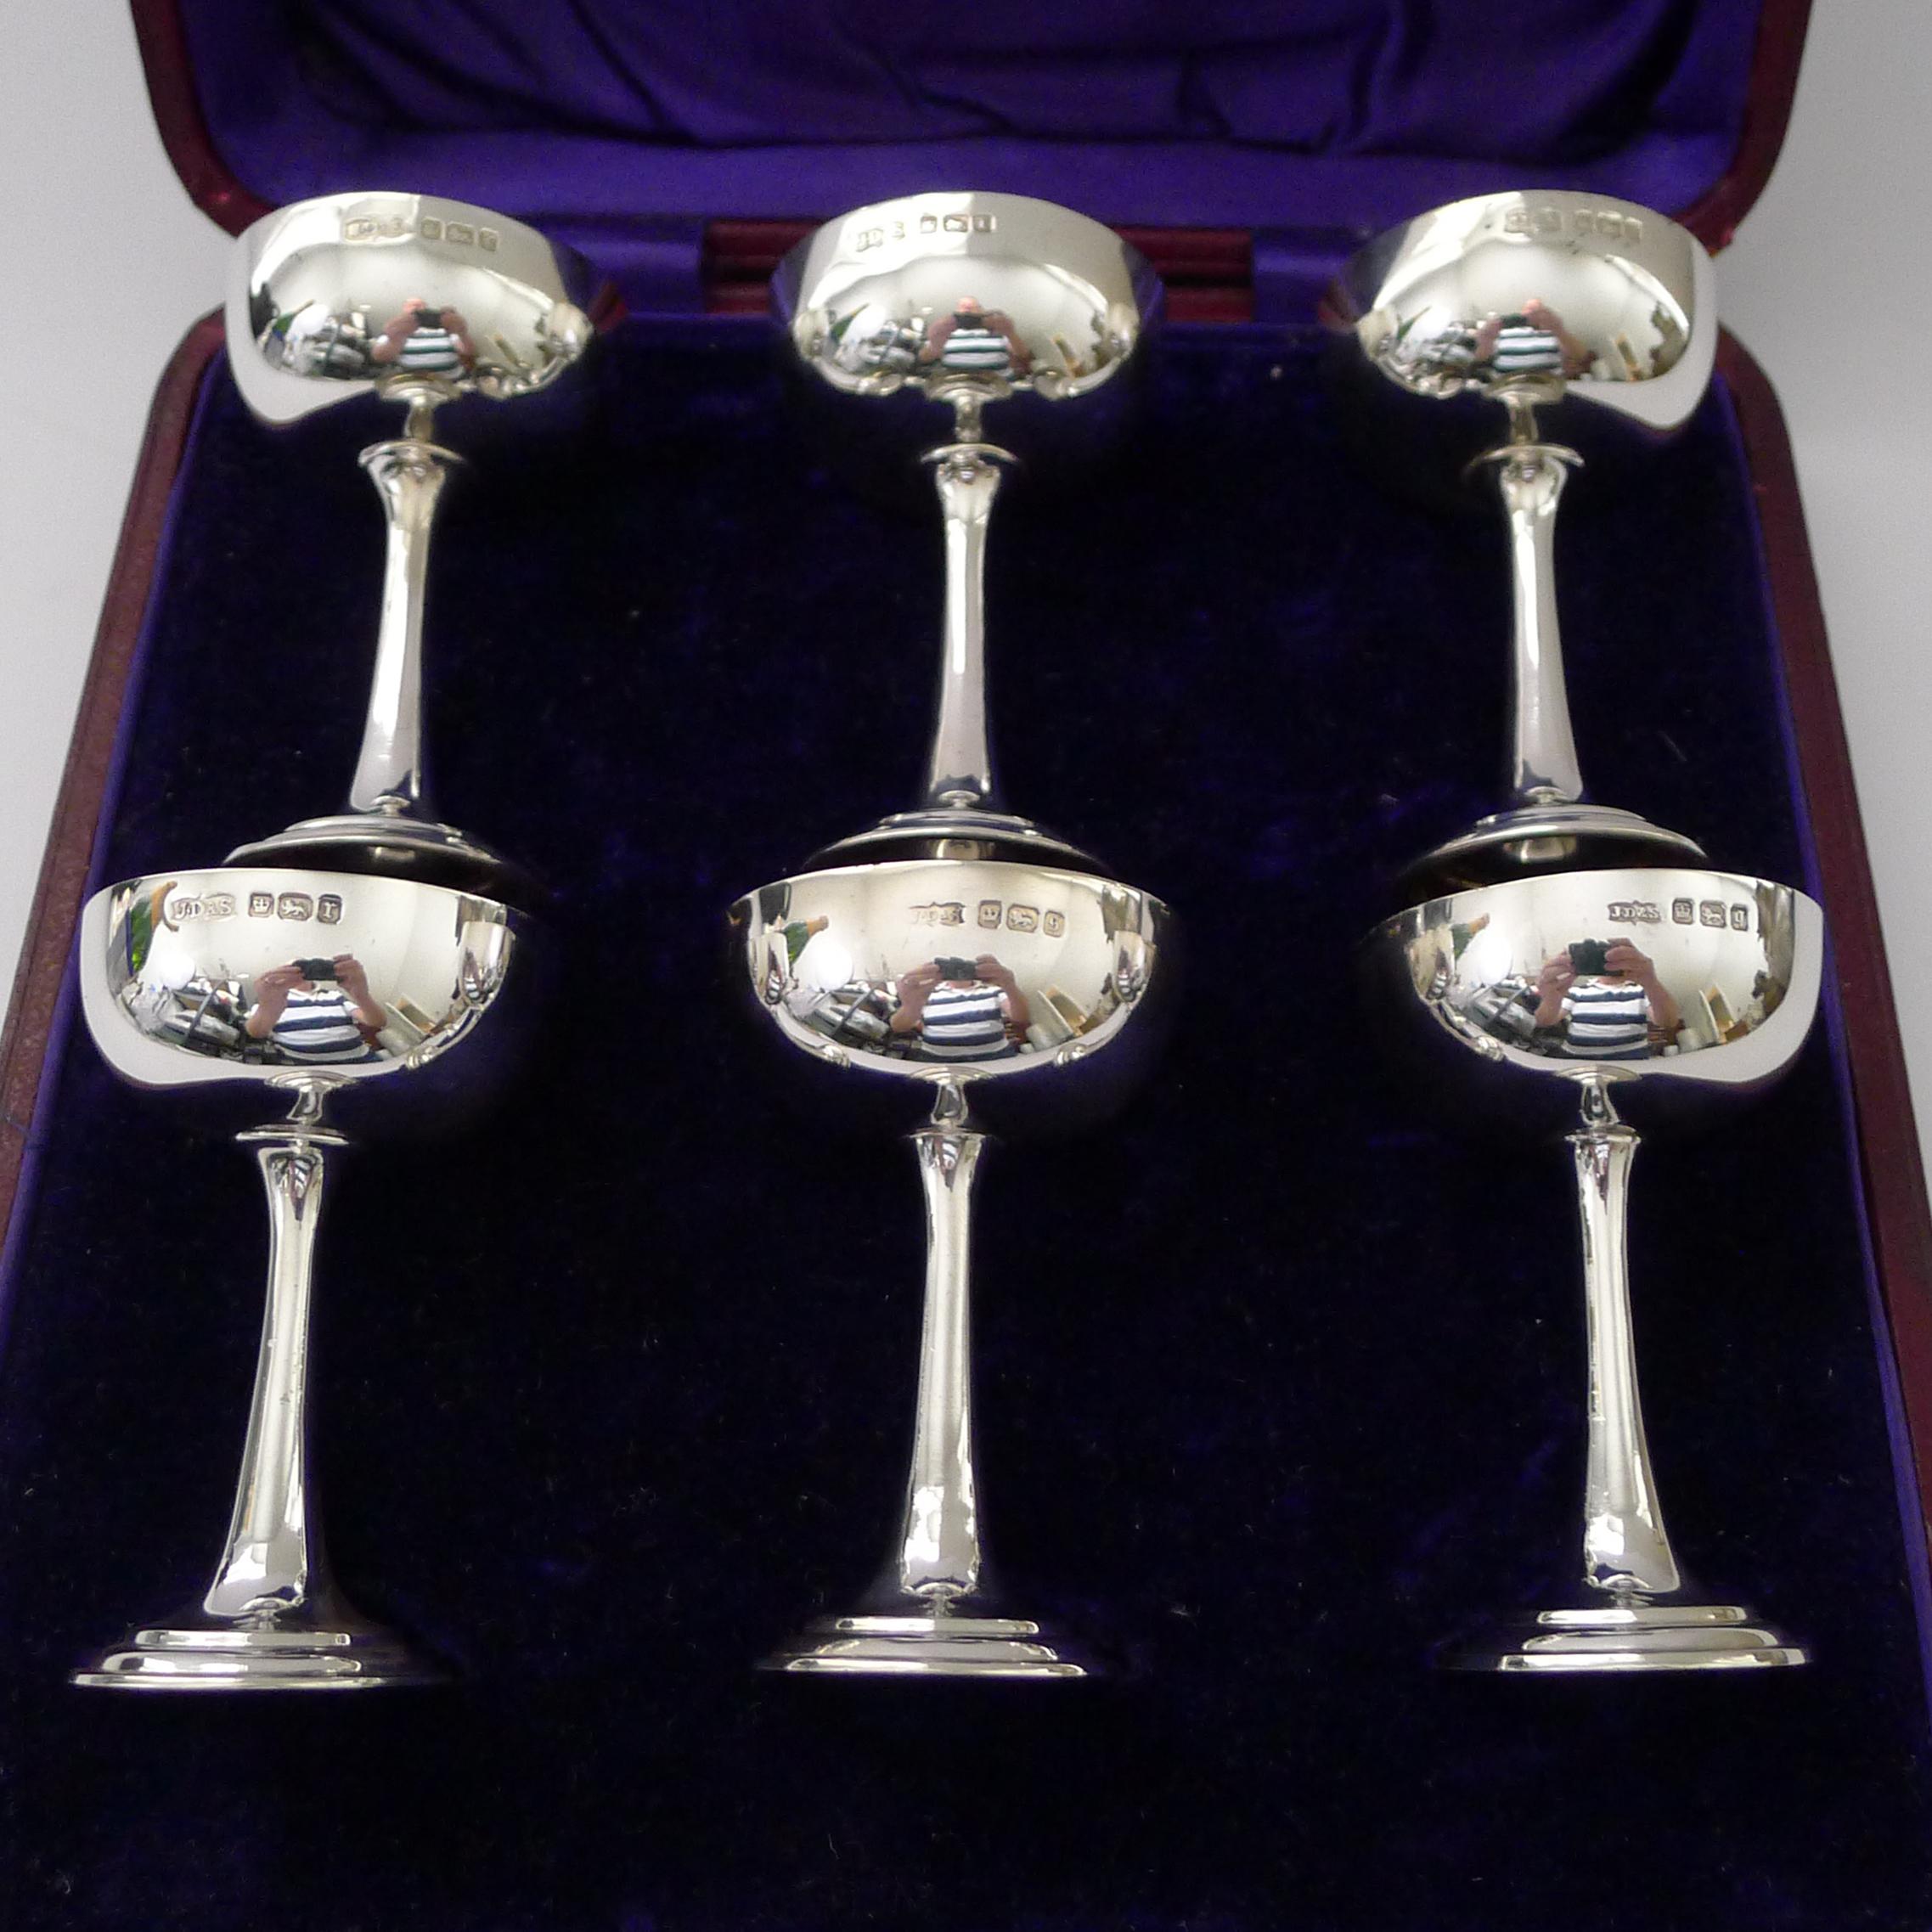 A most unusual set of six Edwardian Liqueur Glasses or Tots in the form of Champagne Coupes.

Made from English solid / sterling silver, each piece fully hallmarked for Sheffield 1910, late Edwardian in era.  The makers mark is also present for the